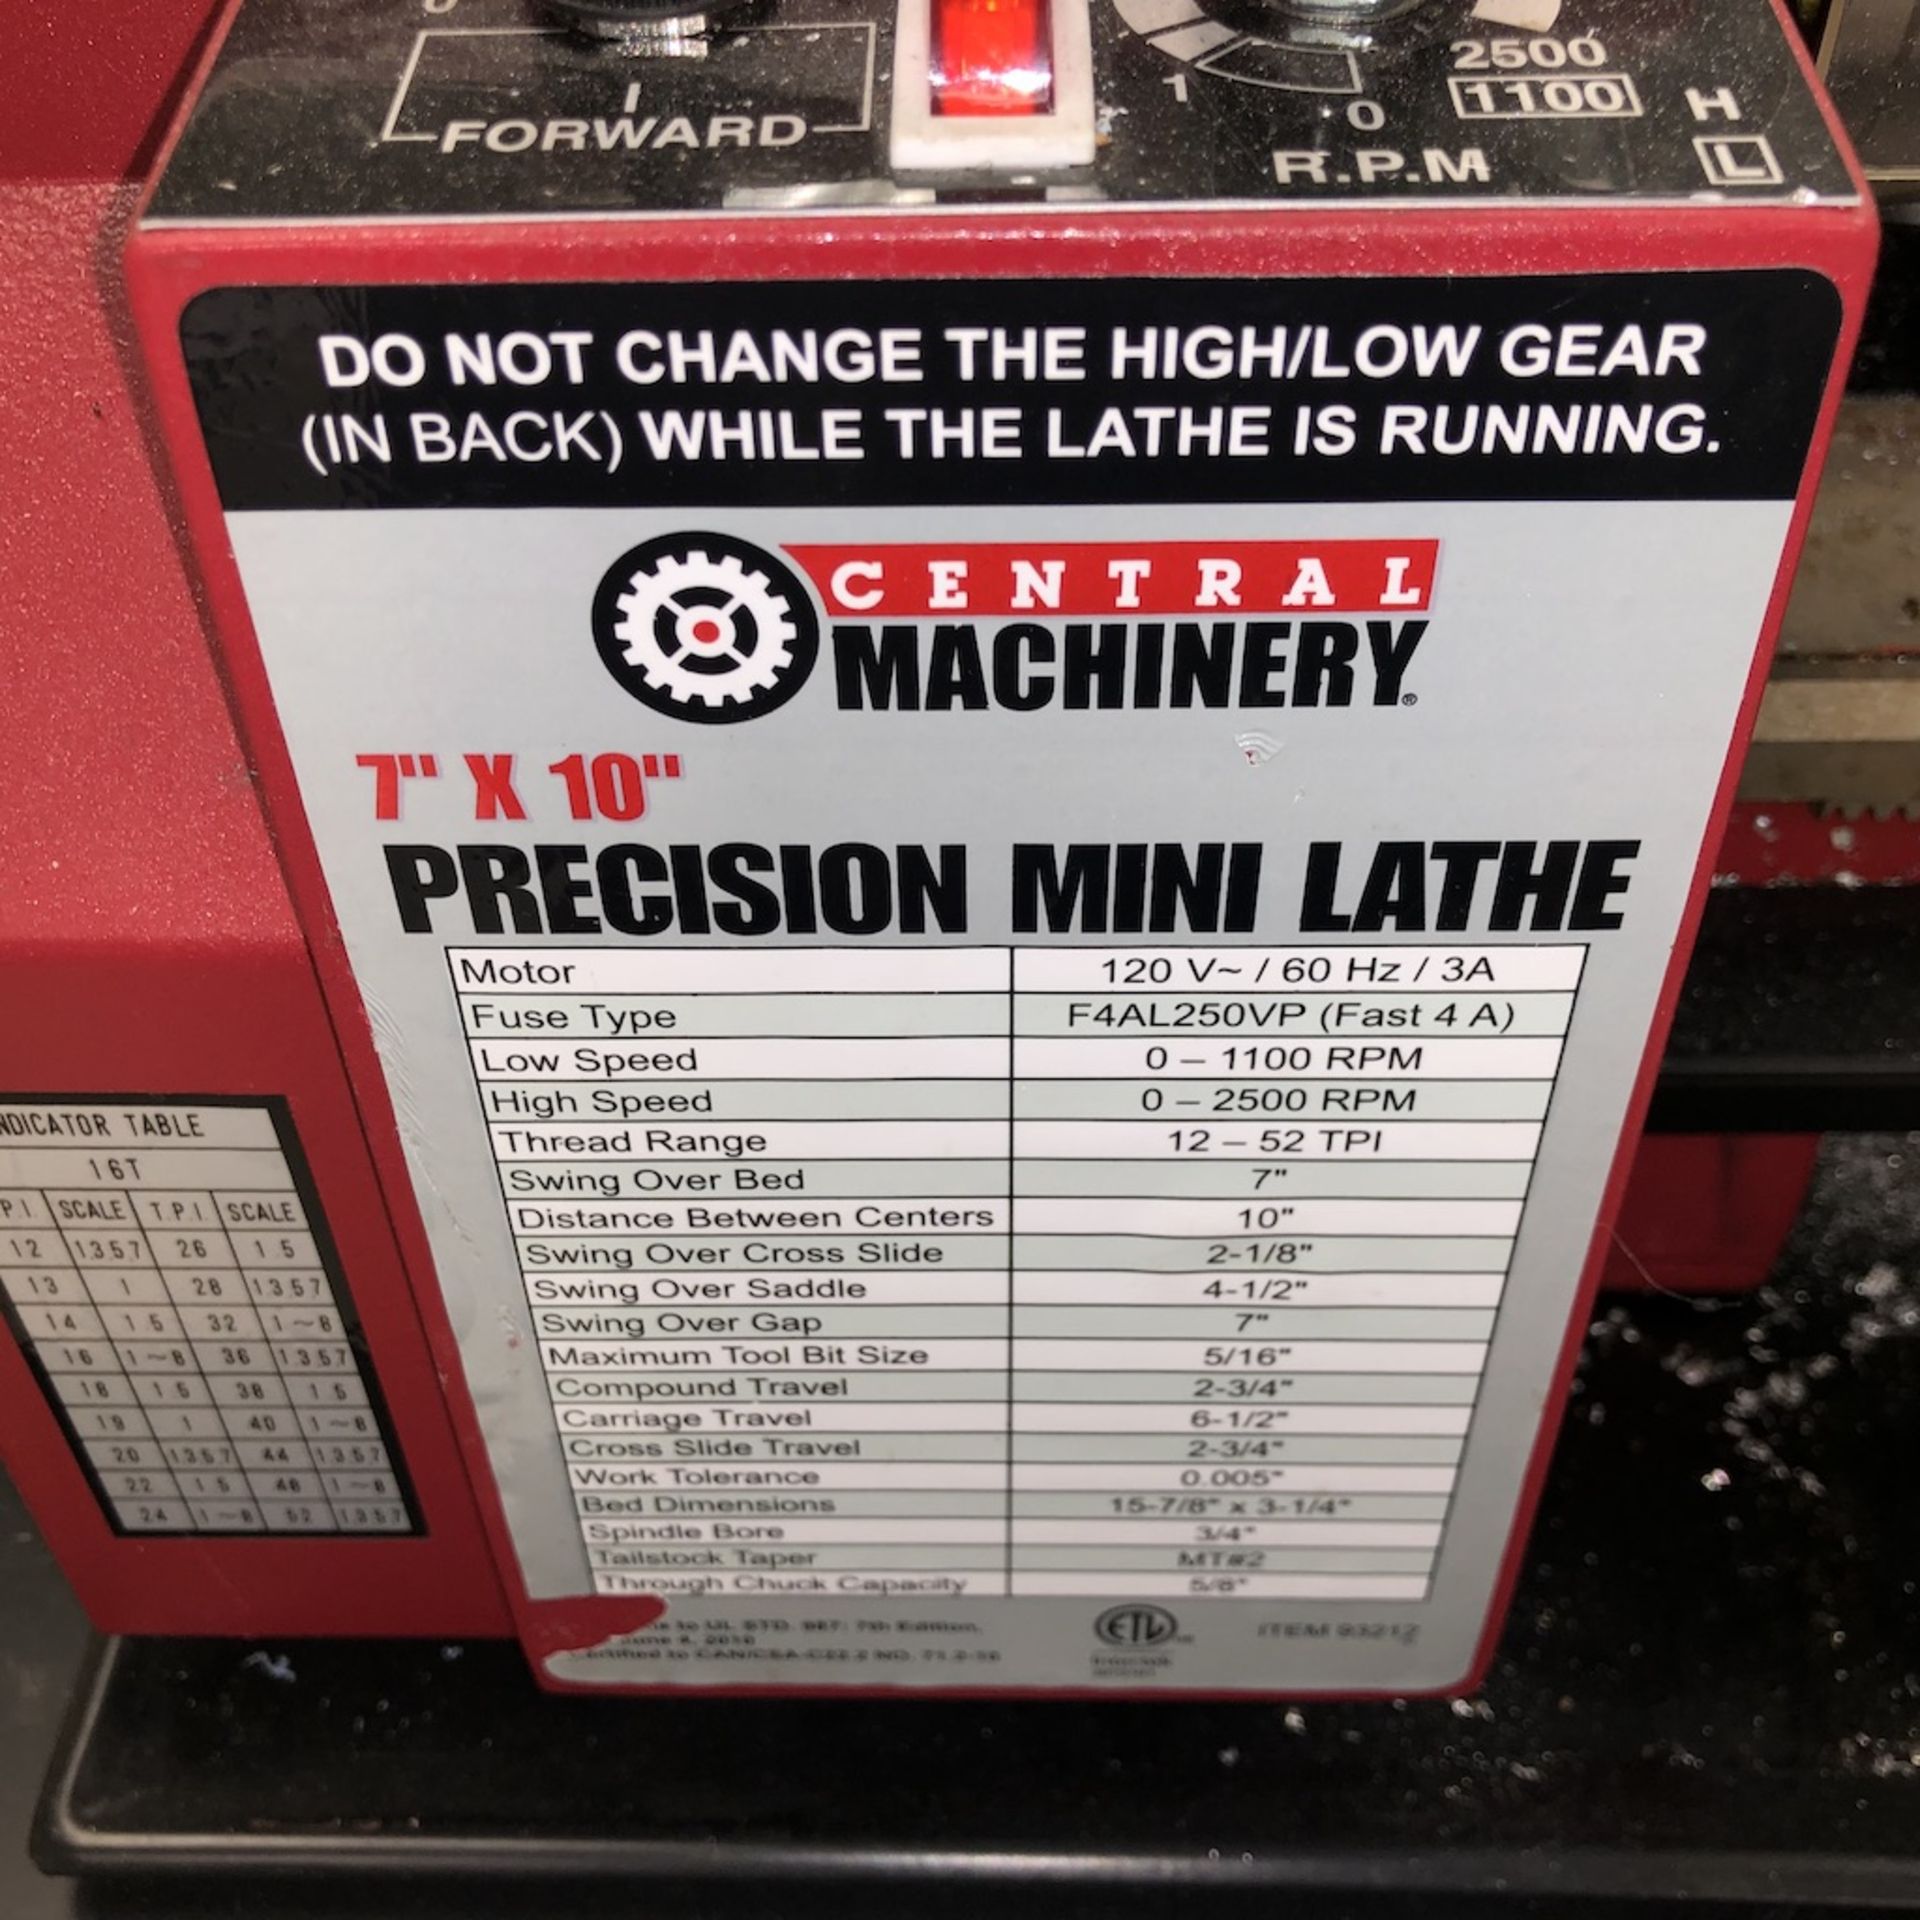 CENTRAL MACHINERY BENCHTOP 7"" x 10"" PRECISION MINI LATHE - Image 4 of 12